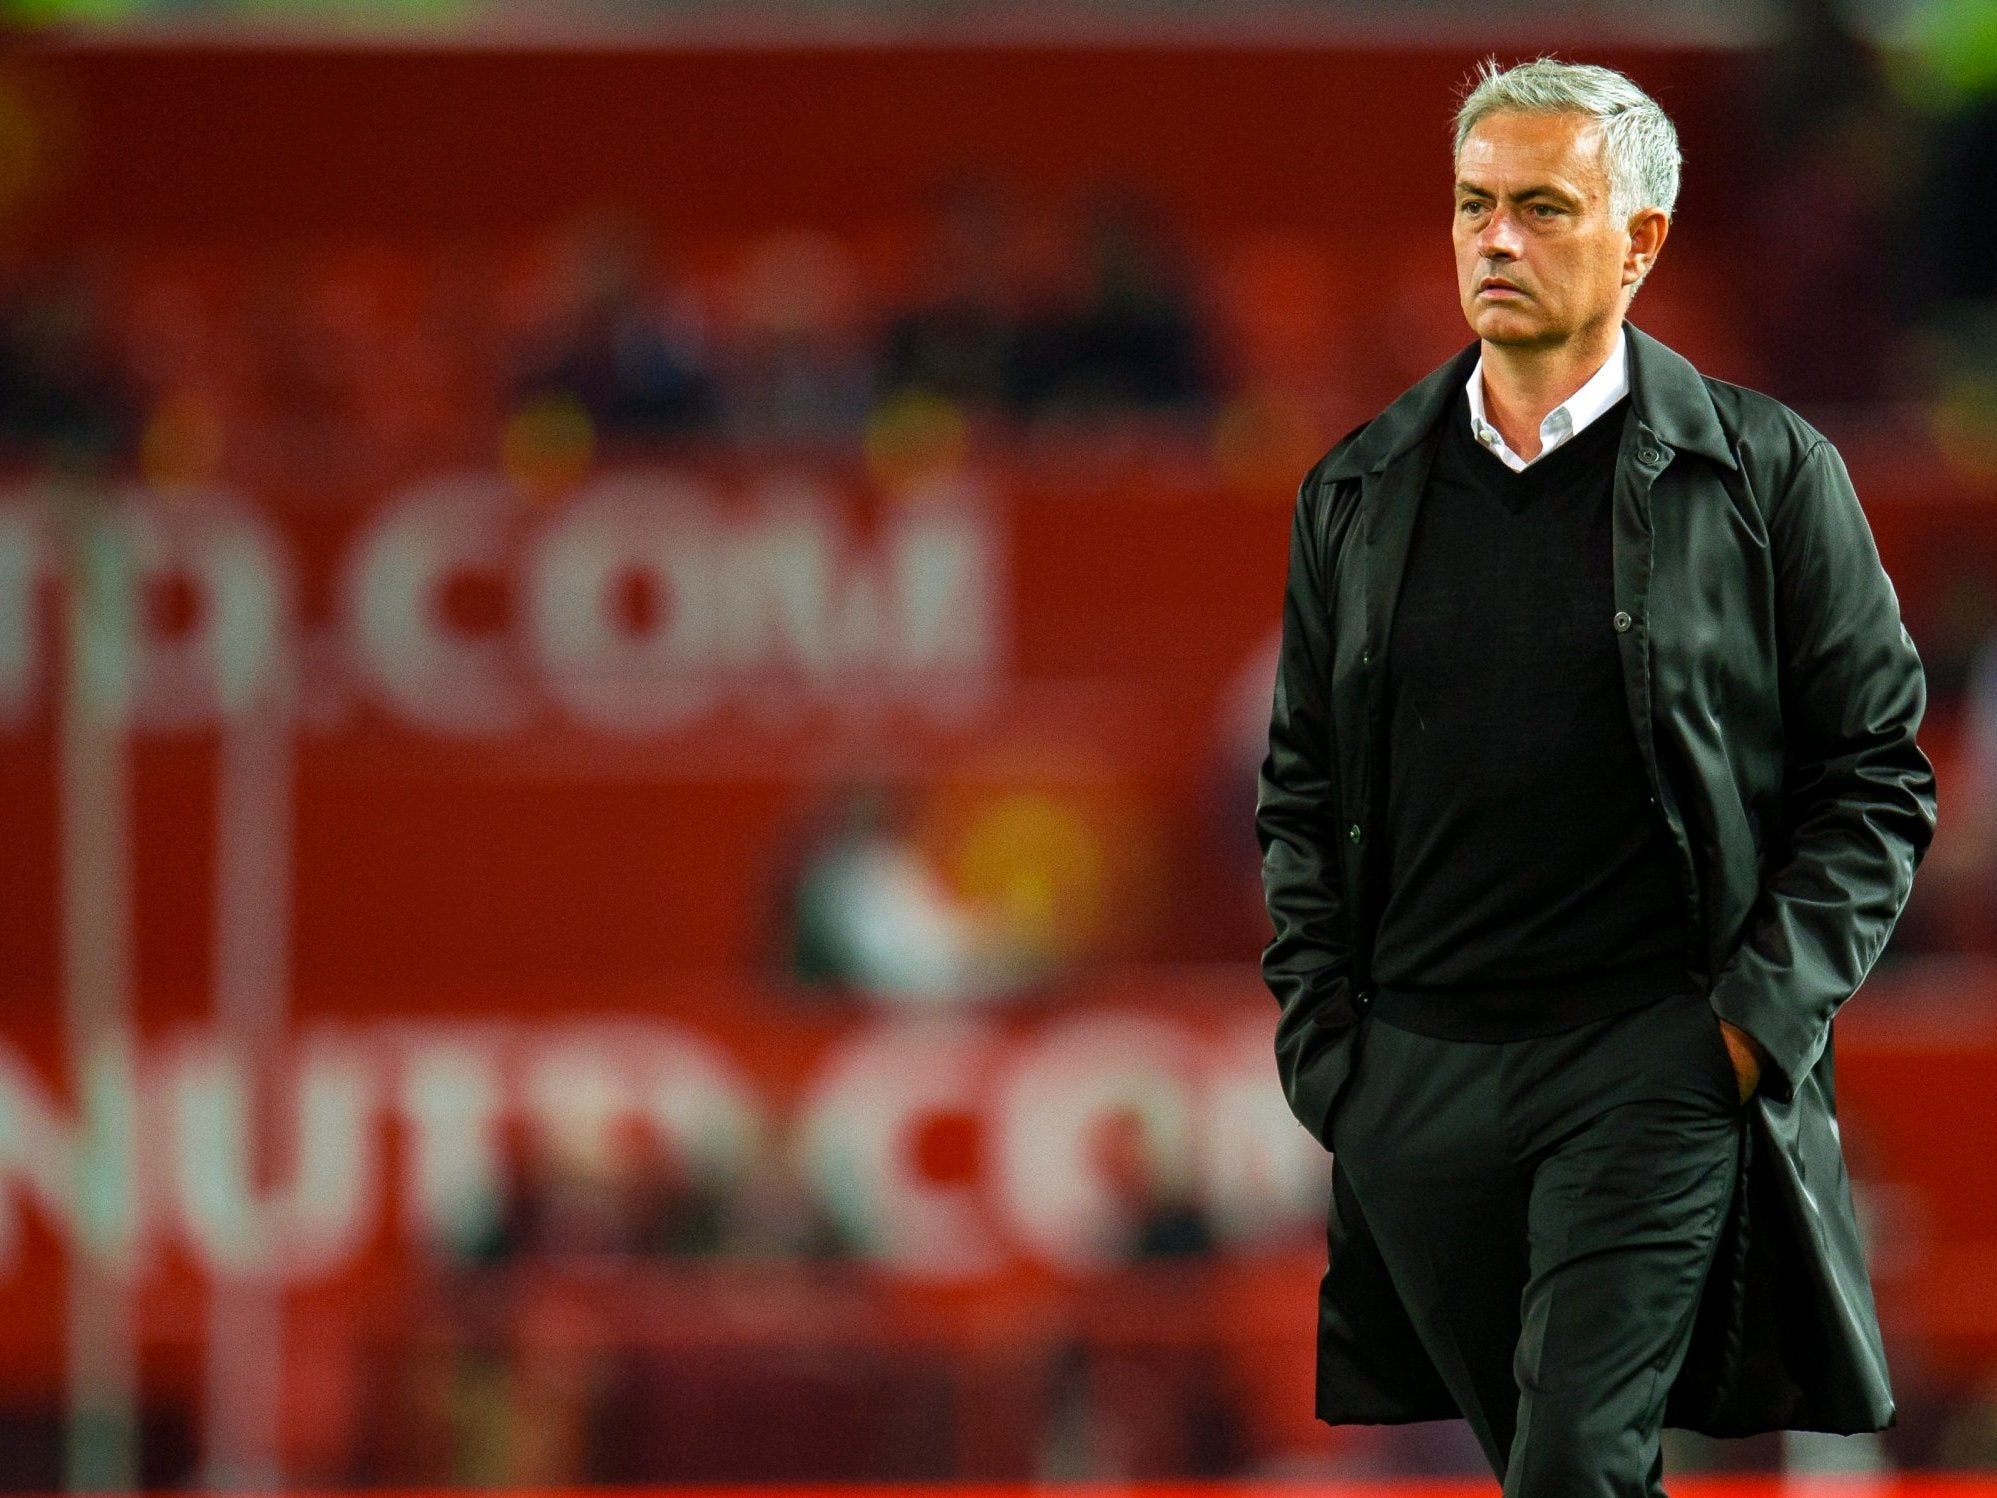 Mourinho has shown no capacity to learn from and overcome periods of adversity